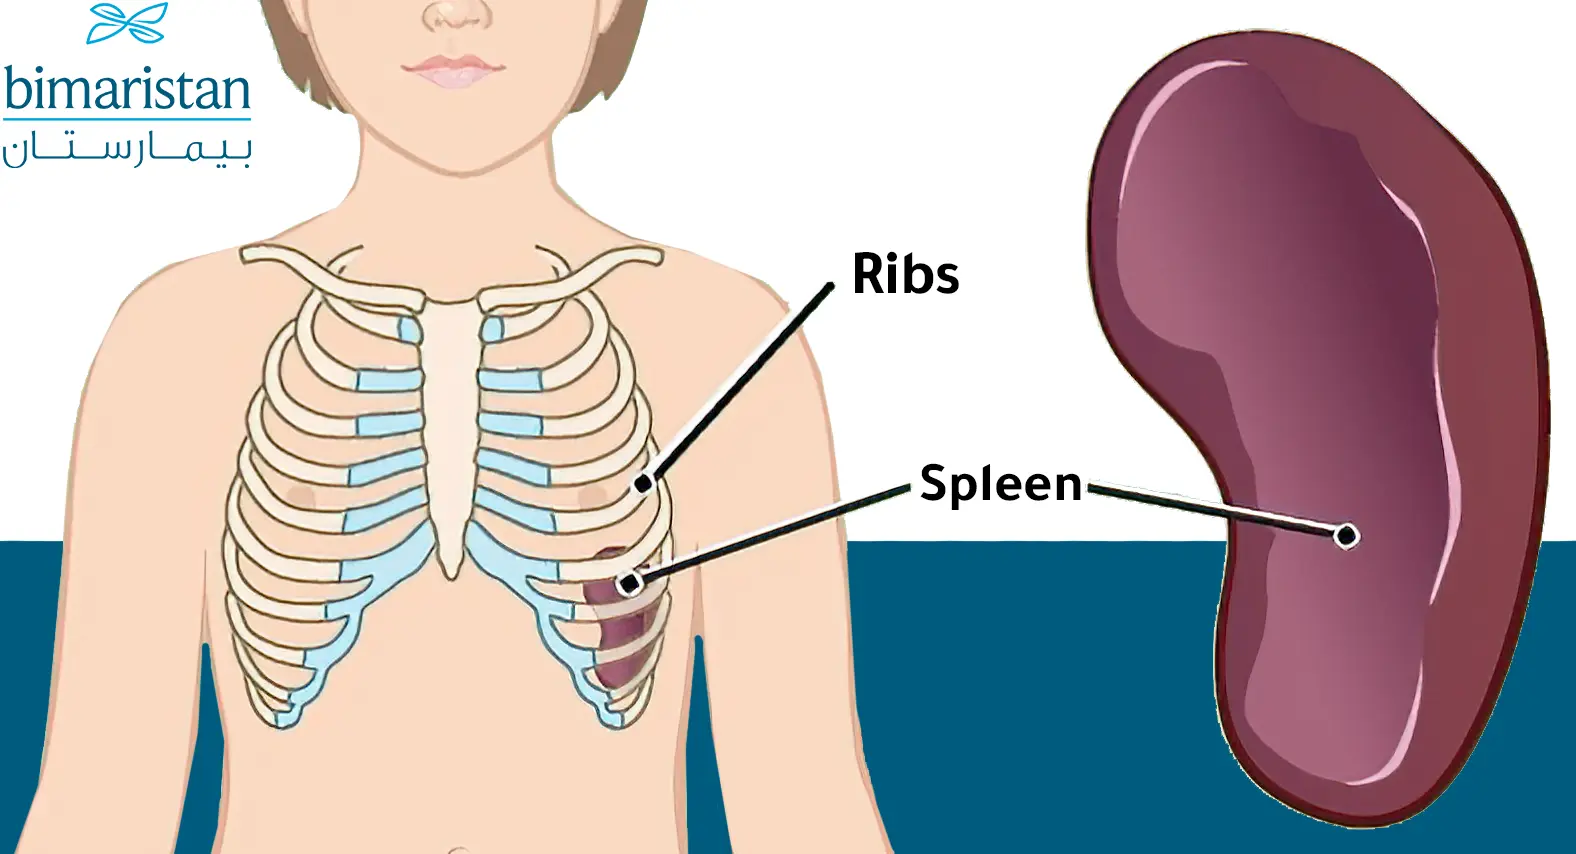 A graphic image showing the location of the spleen in the human body and its relationship to the ribs